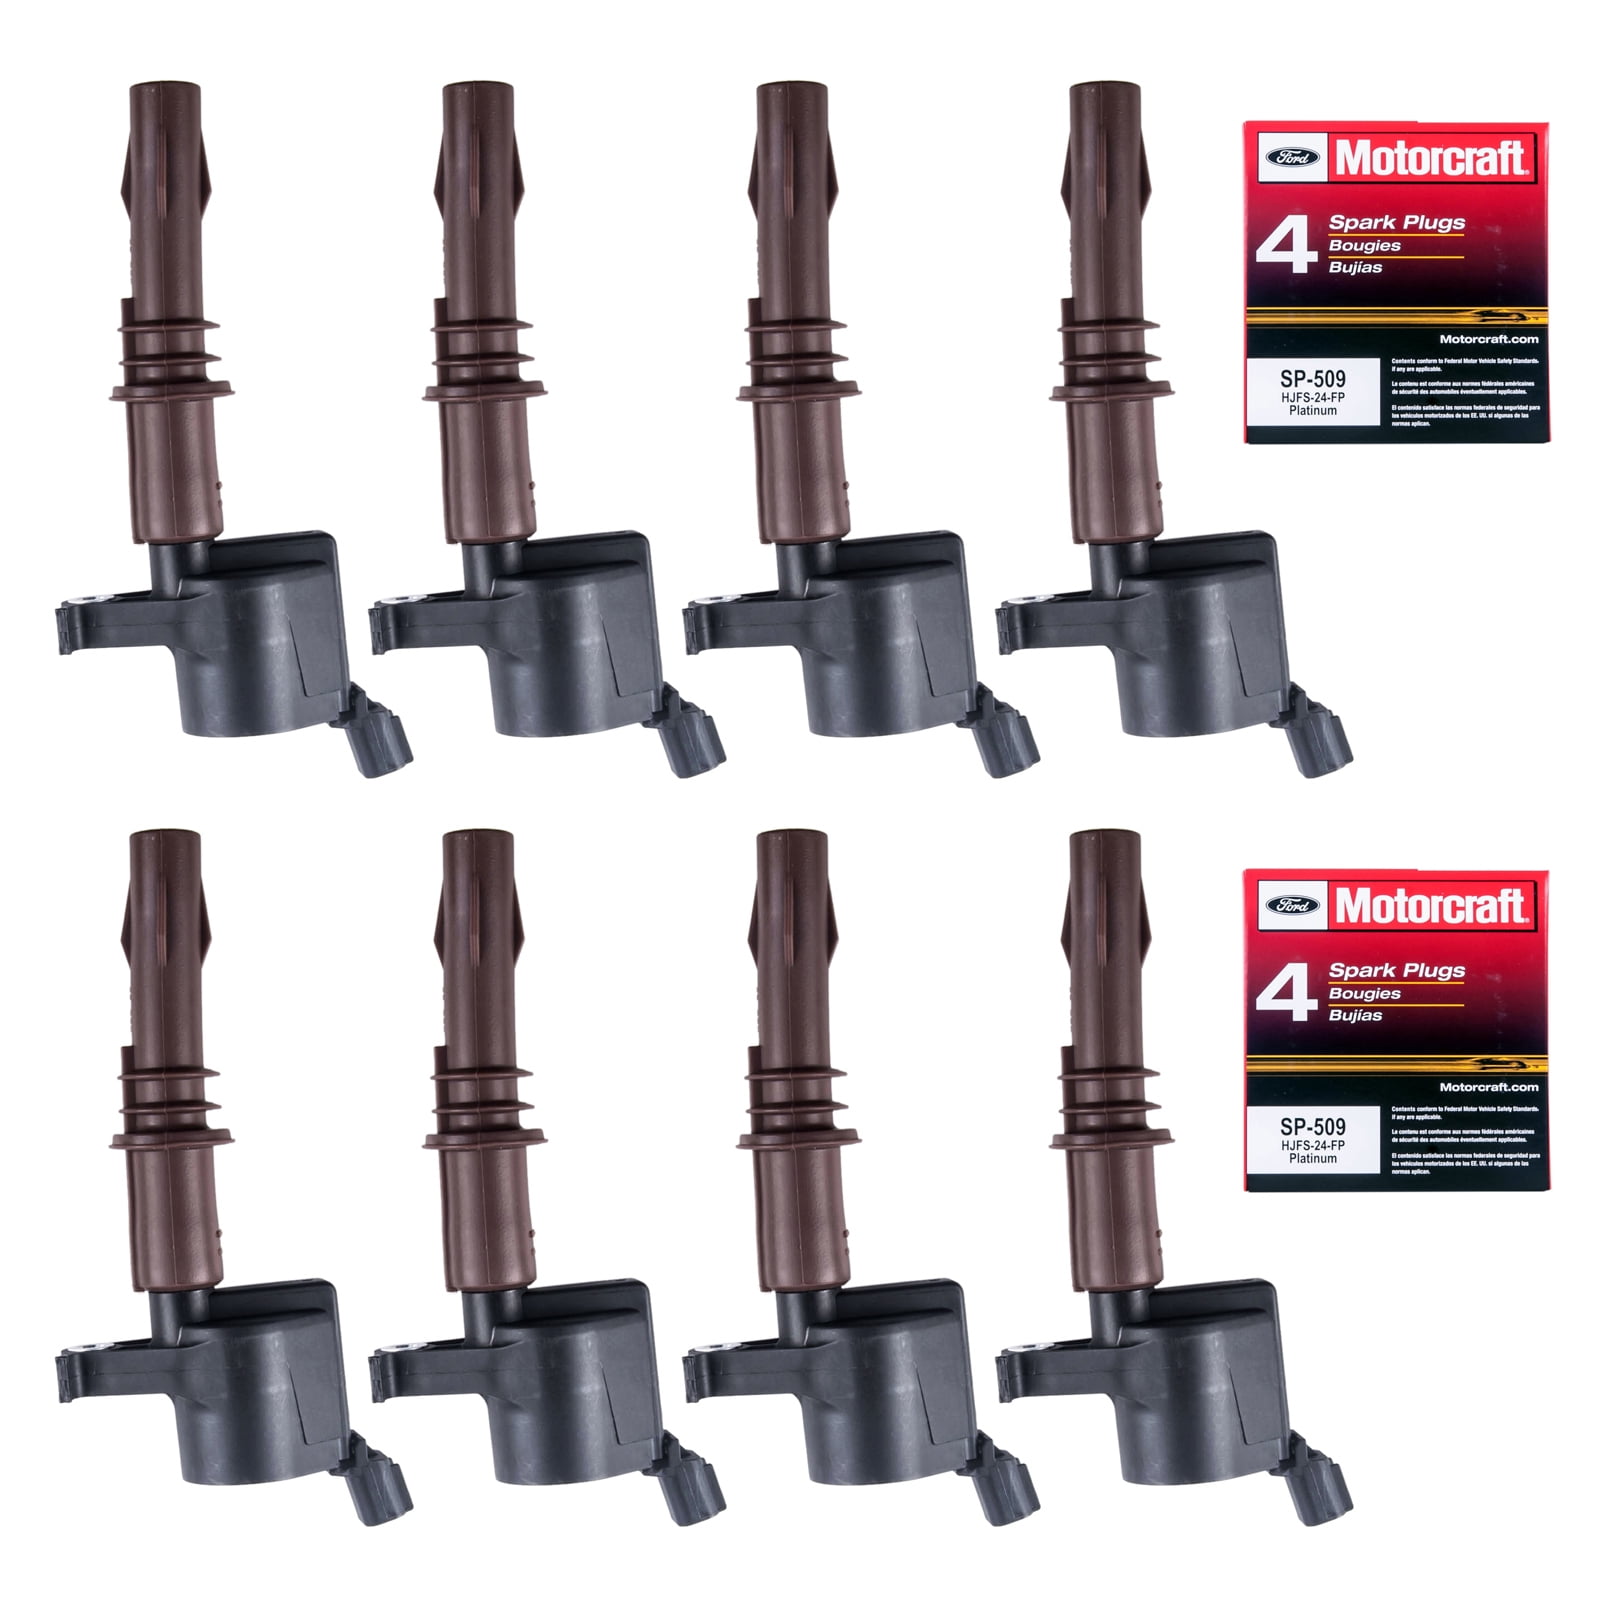 ECCPP Ignition Coils Pack of 8 Compatible with Lincoln Mercury Marauder Ford 1997-2011 Replacement for DG512 UF191 C1141 